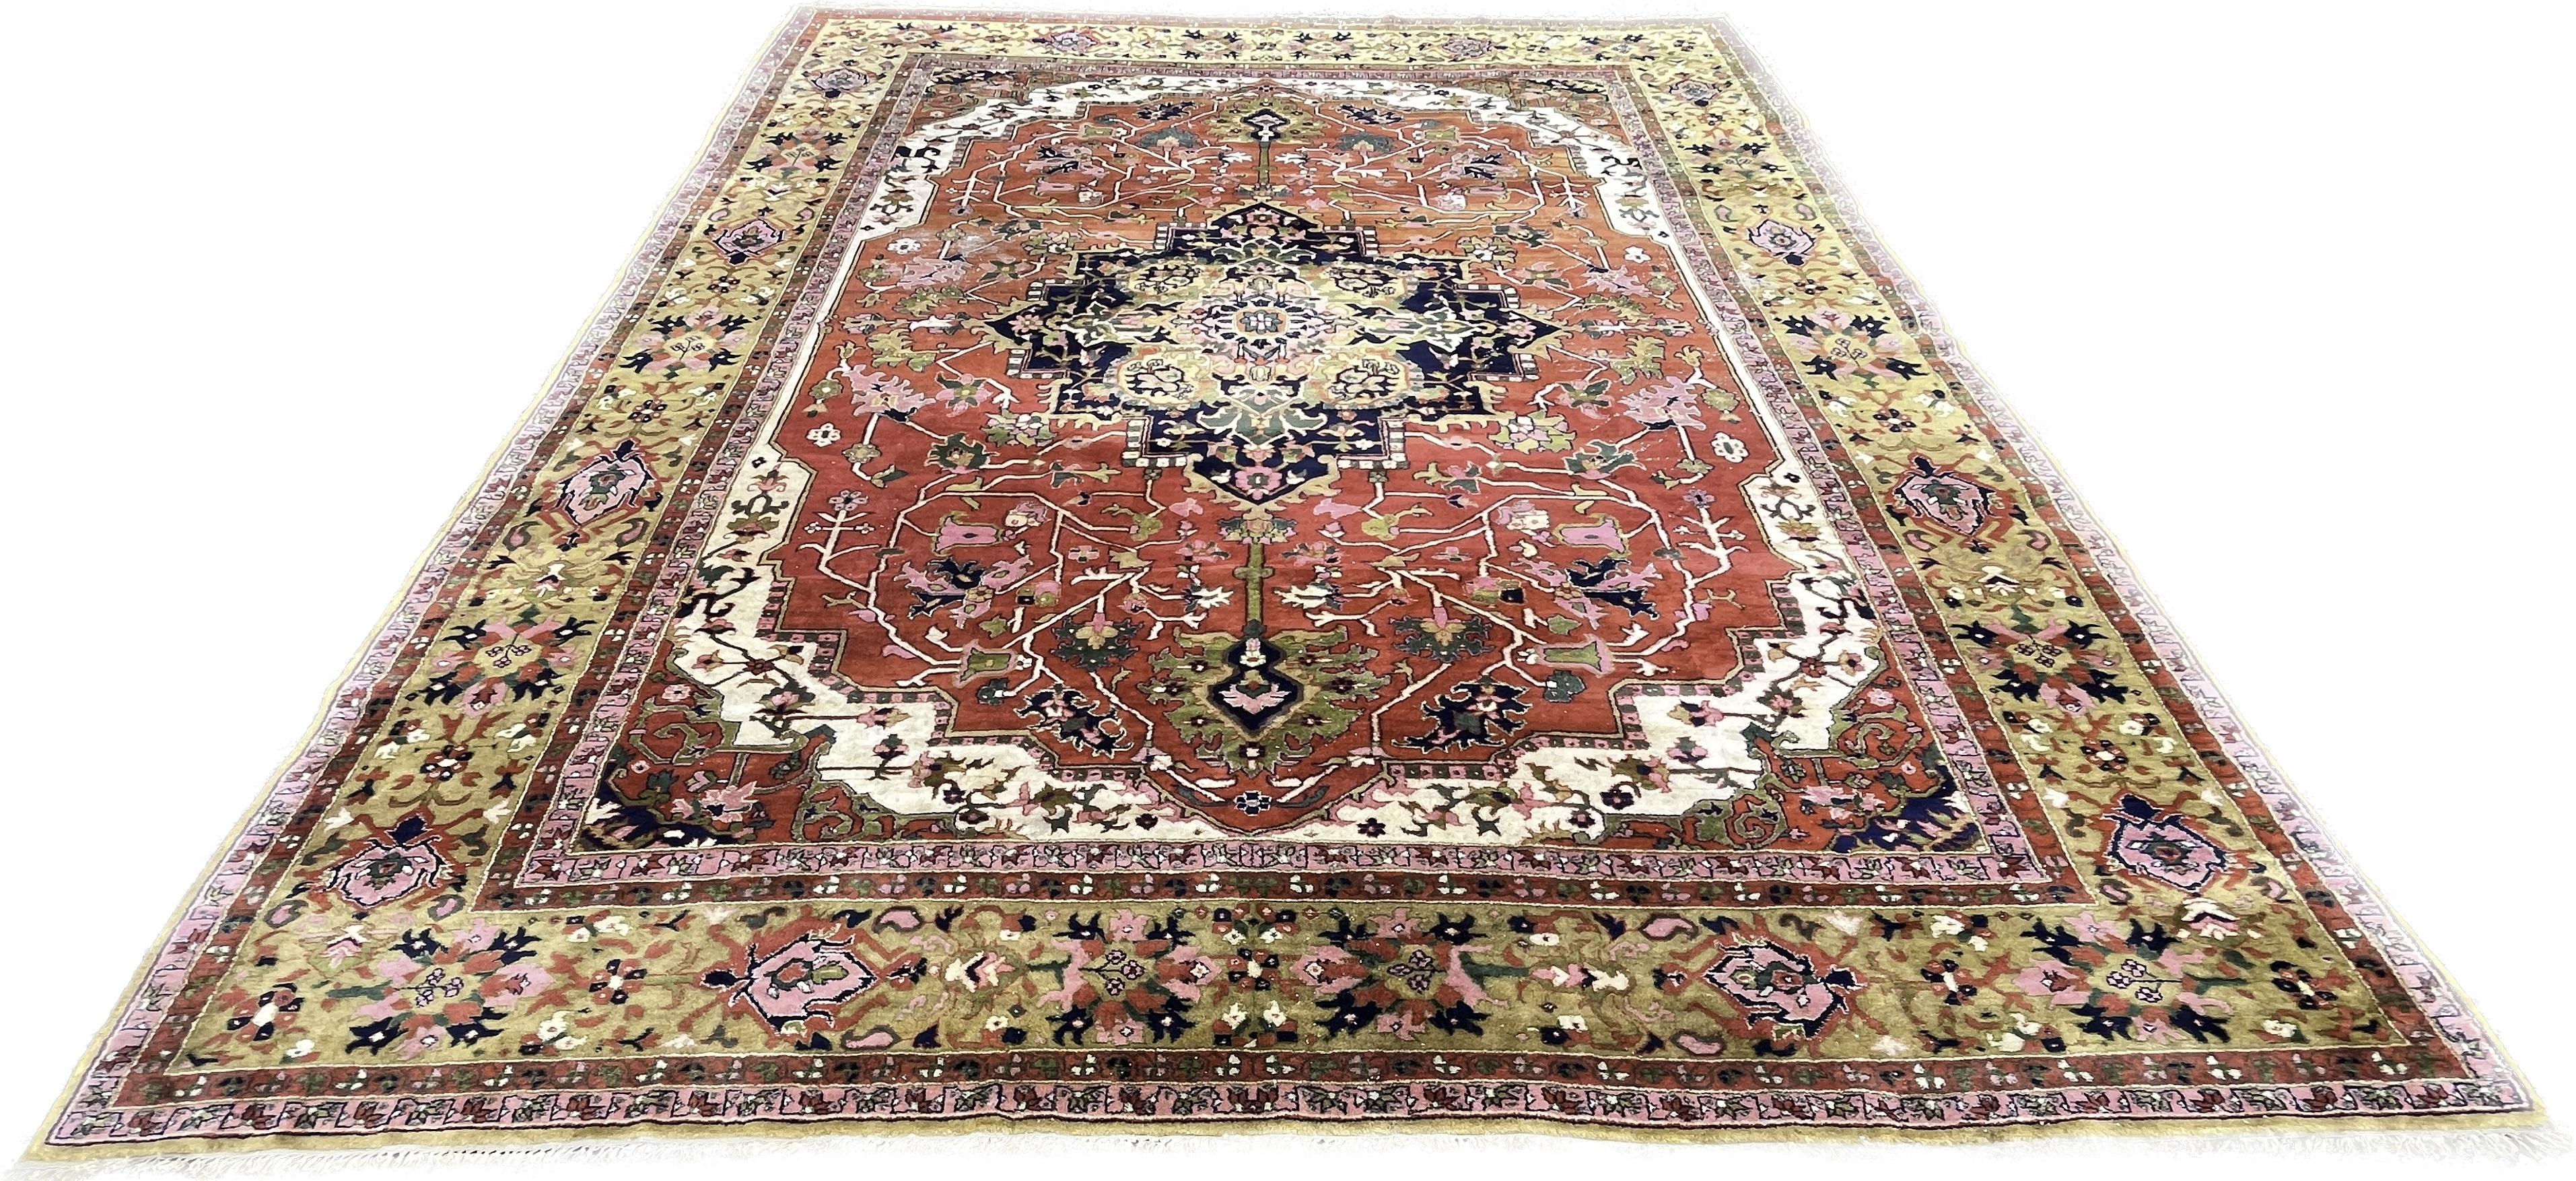 Modern rug in the style of Hériz, hand-knotted in India around 1940.

The many bright colors chosen for this piece are designed to contrast with each other, drawing attention to their shape and composition.
In the center of the rug, a geometric